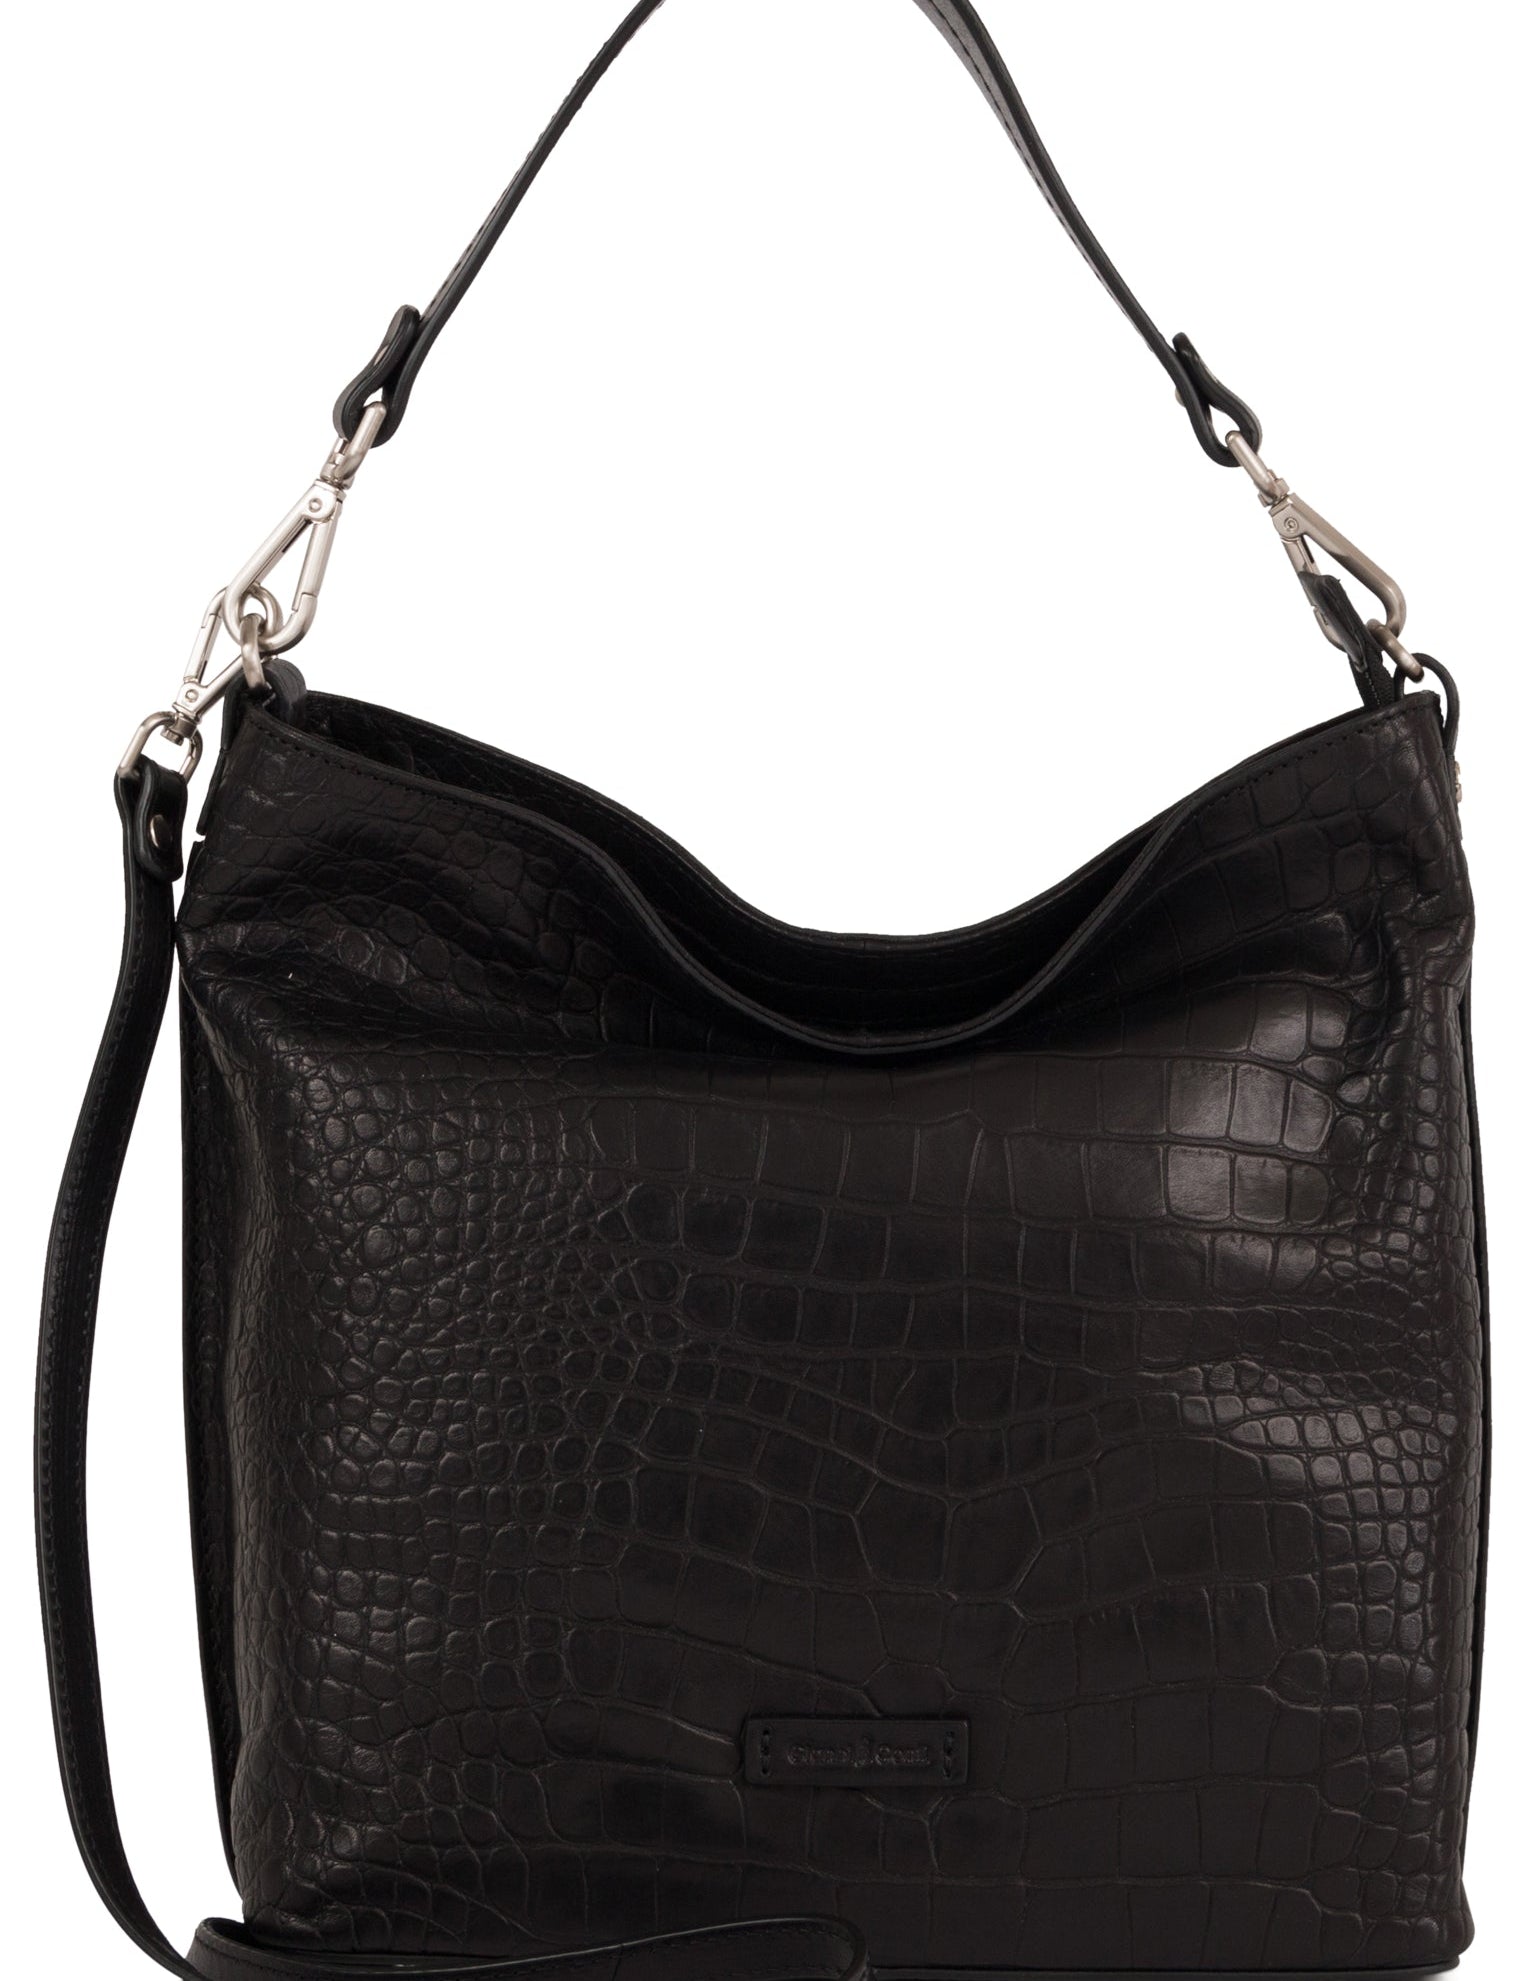 SAVA Croc-Embossed Leather Shoulder Bag by Gianni Conti